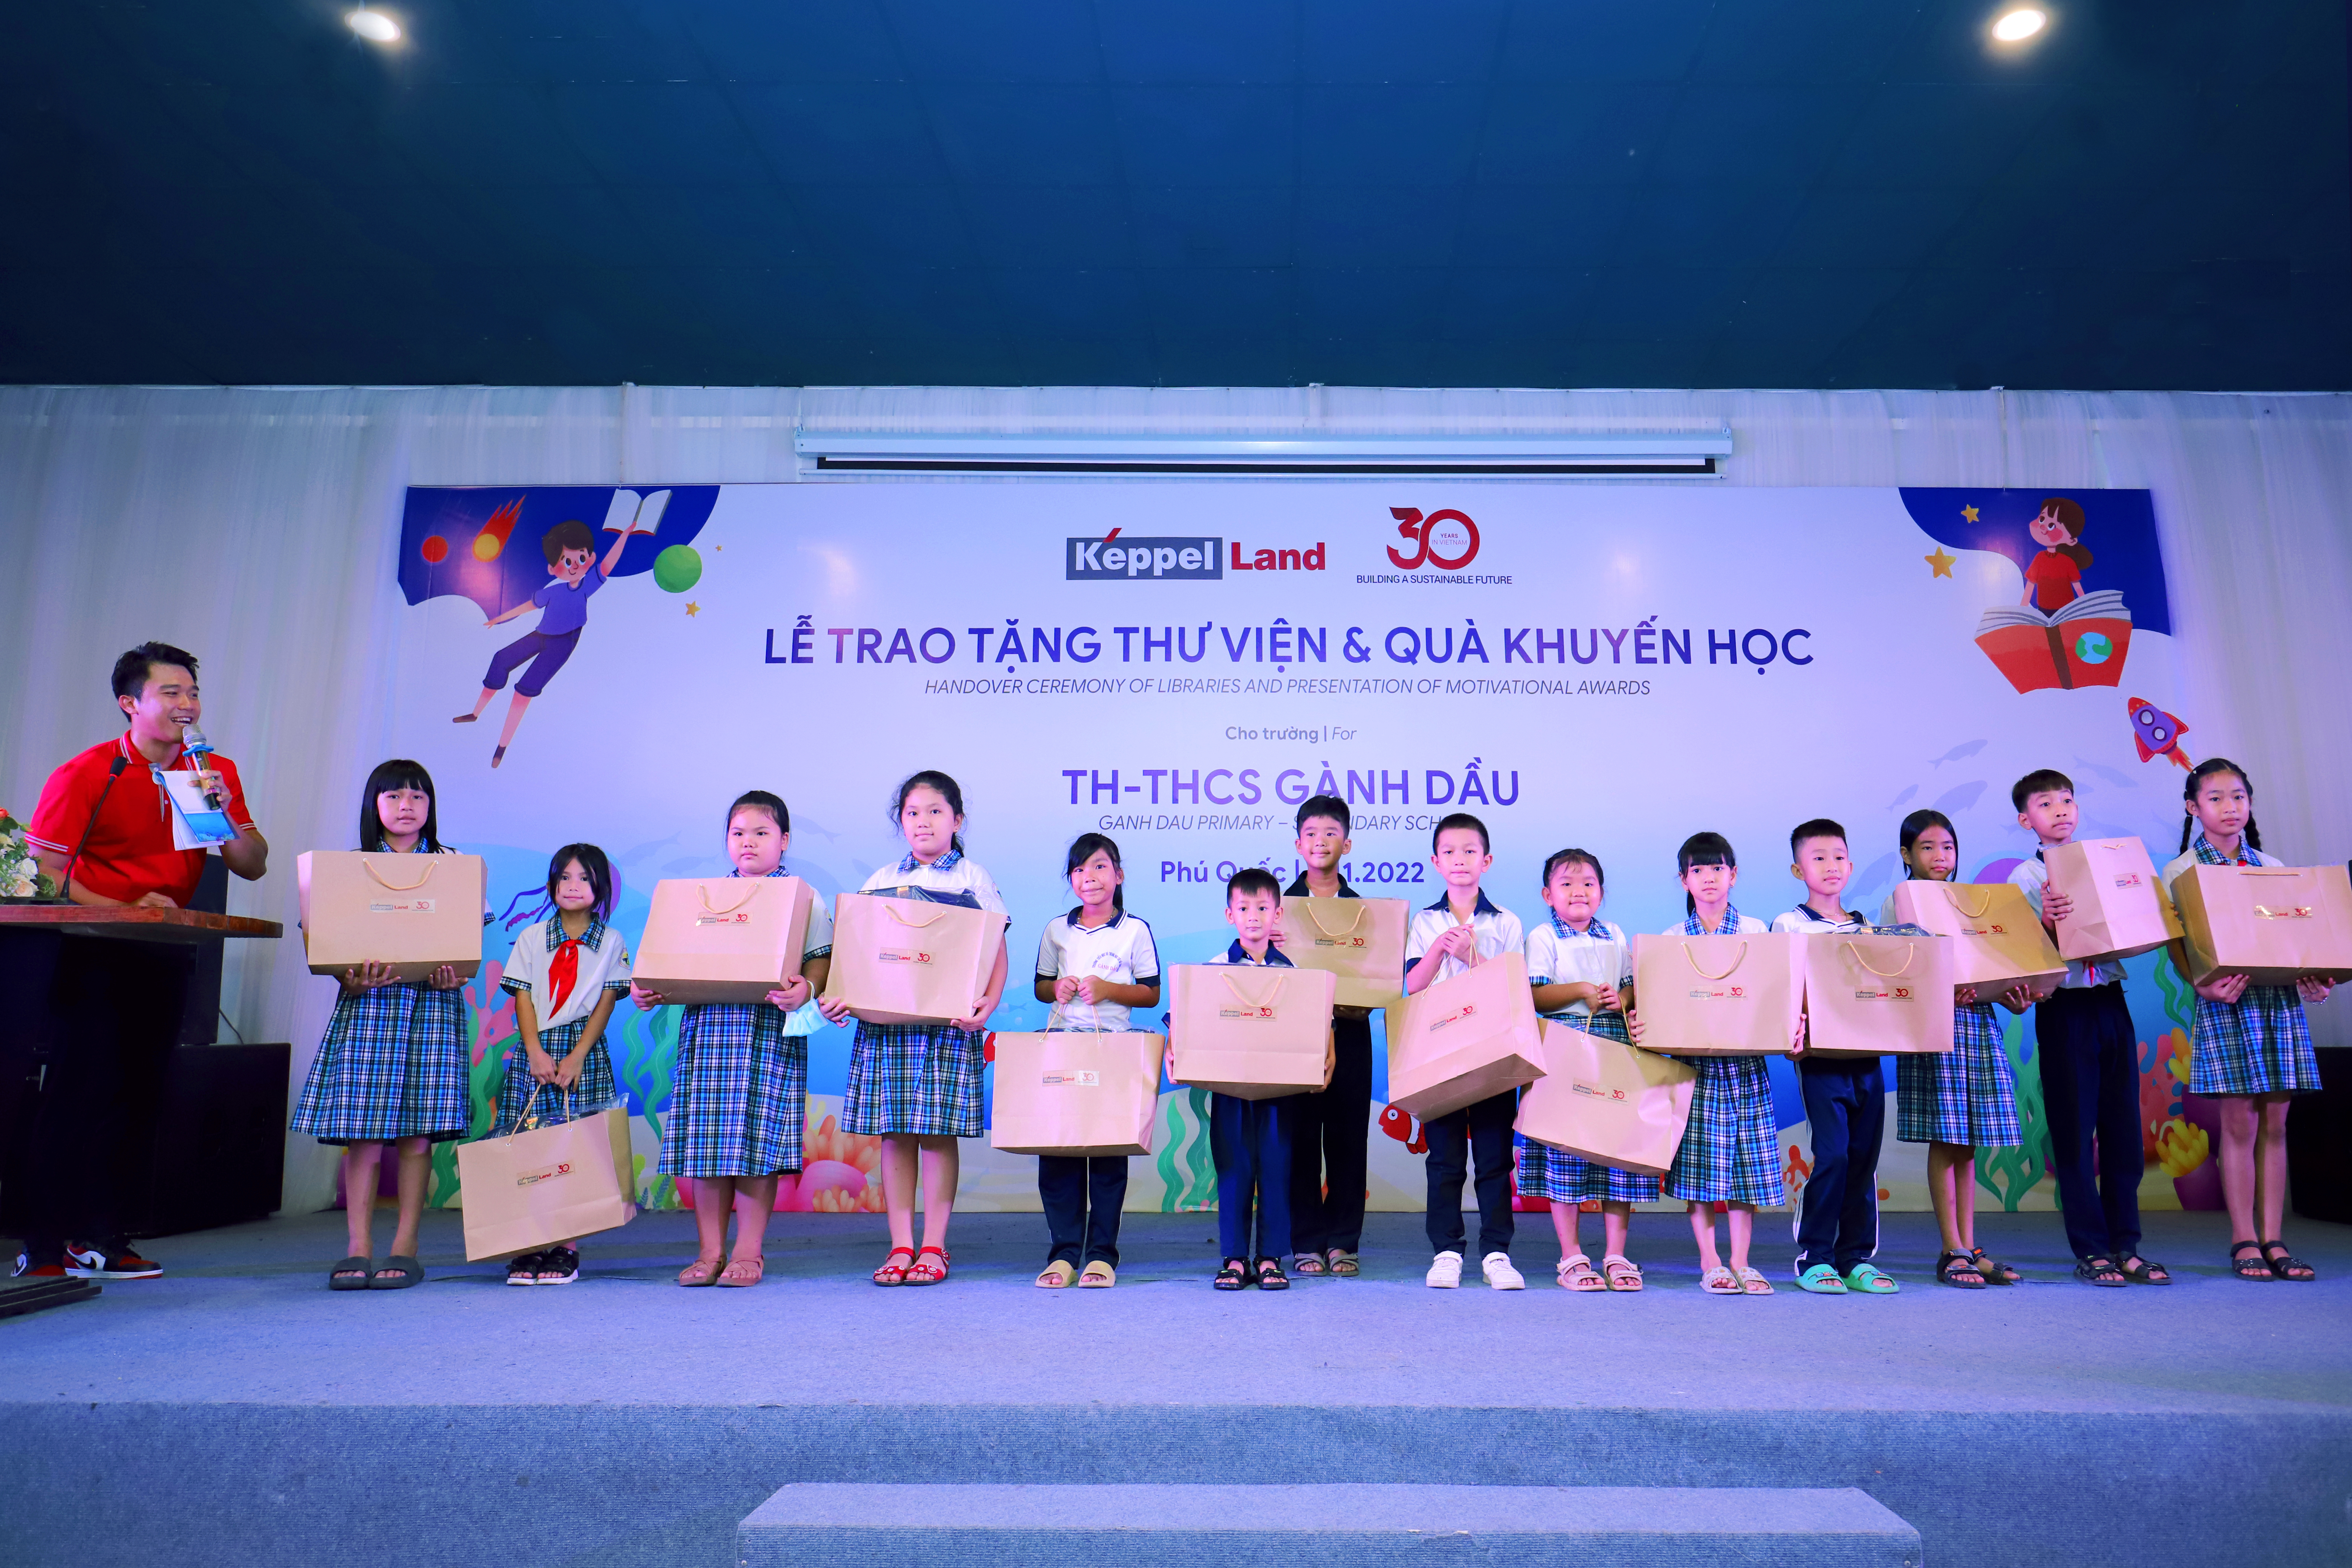 Students of Ganh Dau Primary and Secondary School receiving motivational awards at the event.